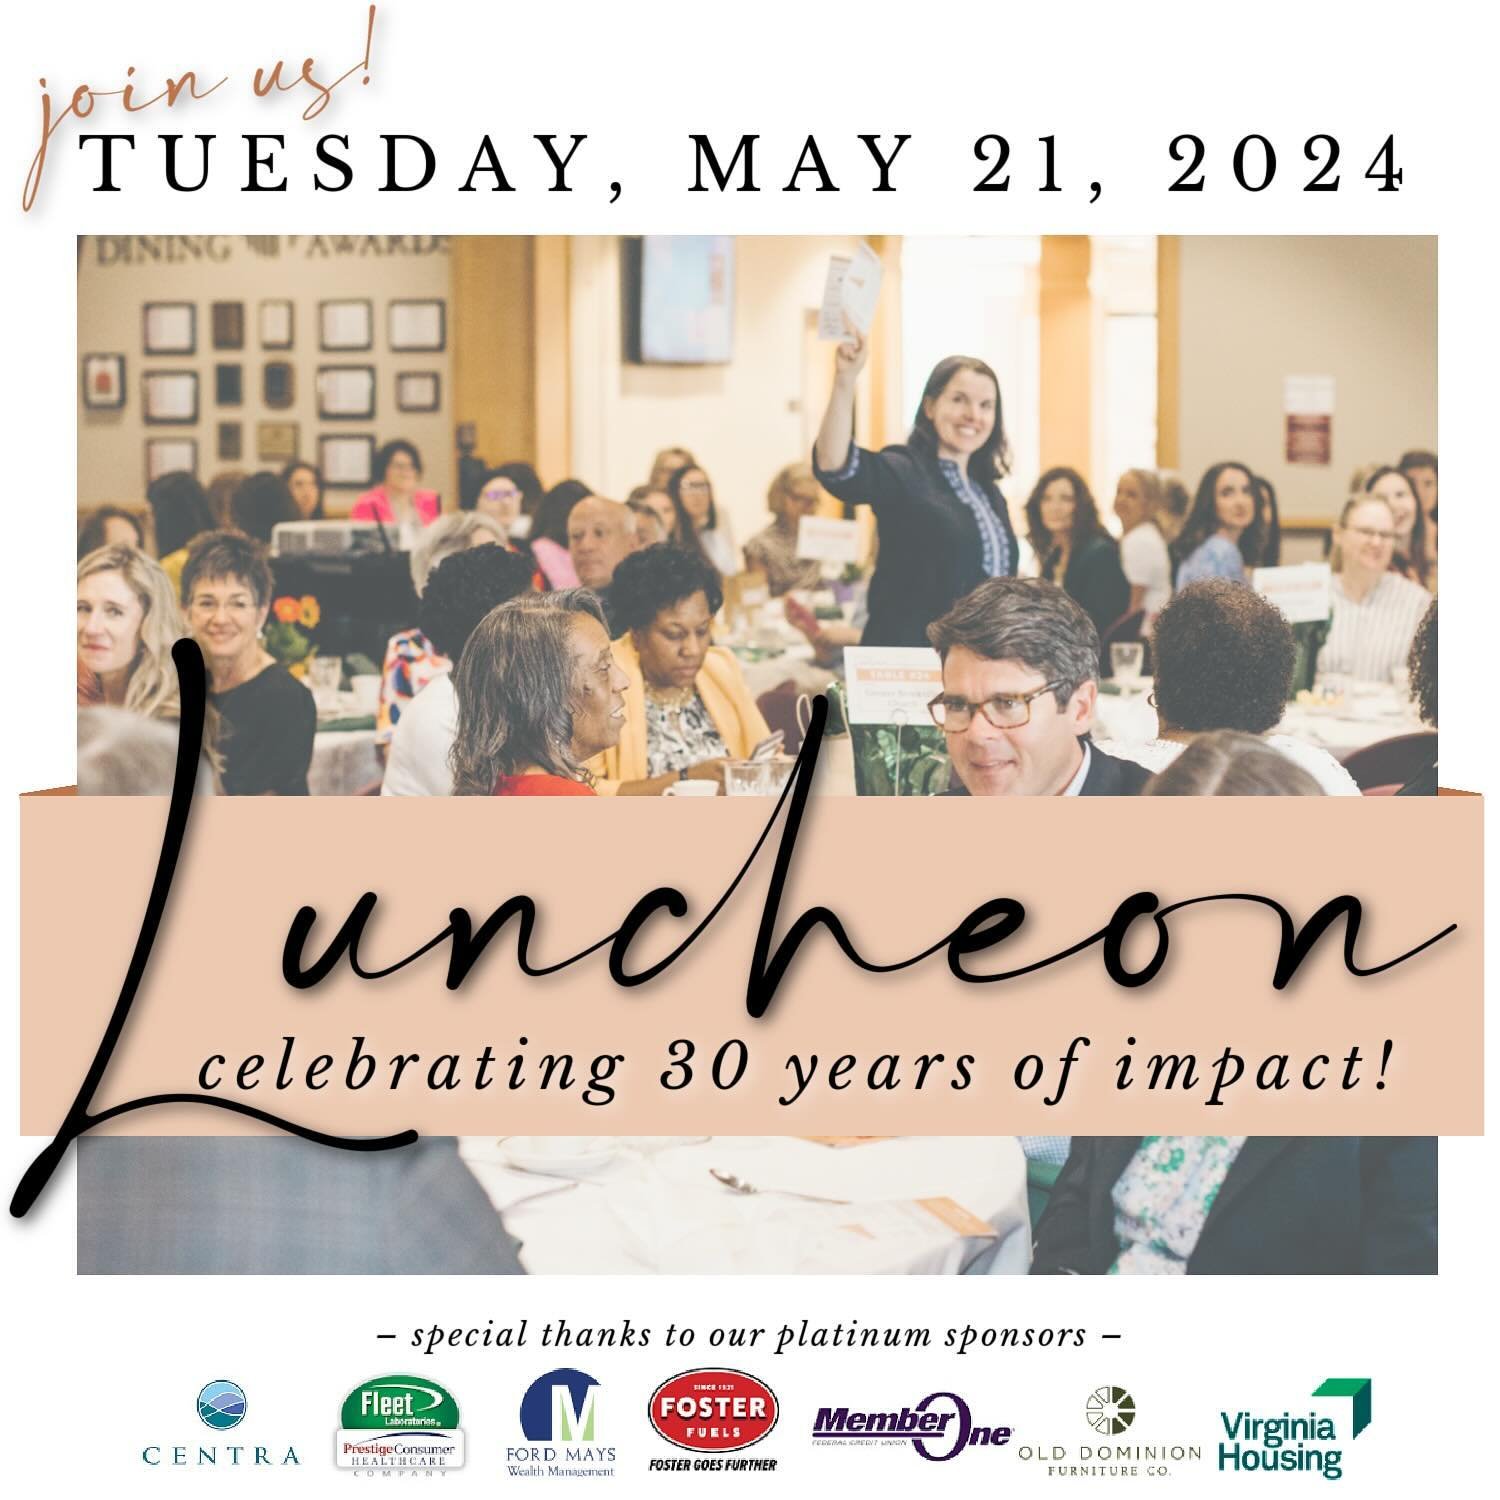 Our Annual Luncheon is just around the corner and we are nearly sold out! Get your tickets today to join us in commemorating our 30th anniversary and three decades of meaningful impact. Guests will enjoy a delicious meal, engaging program, and exciti